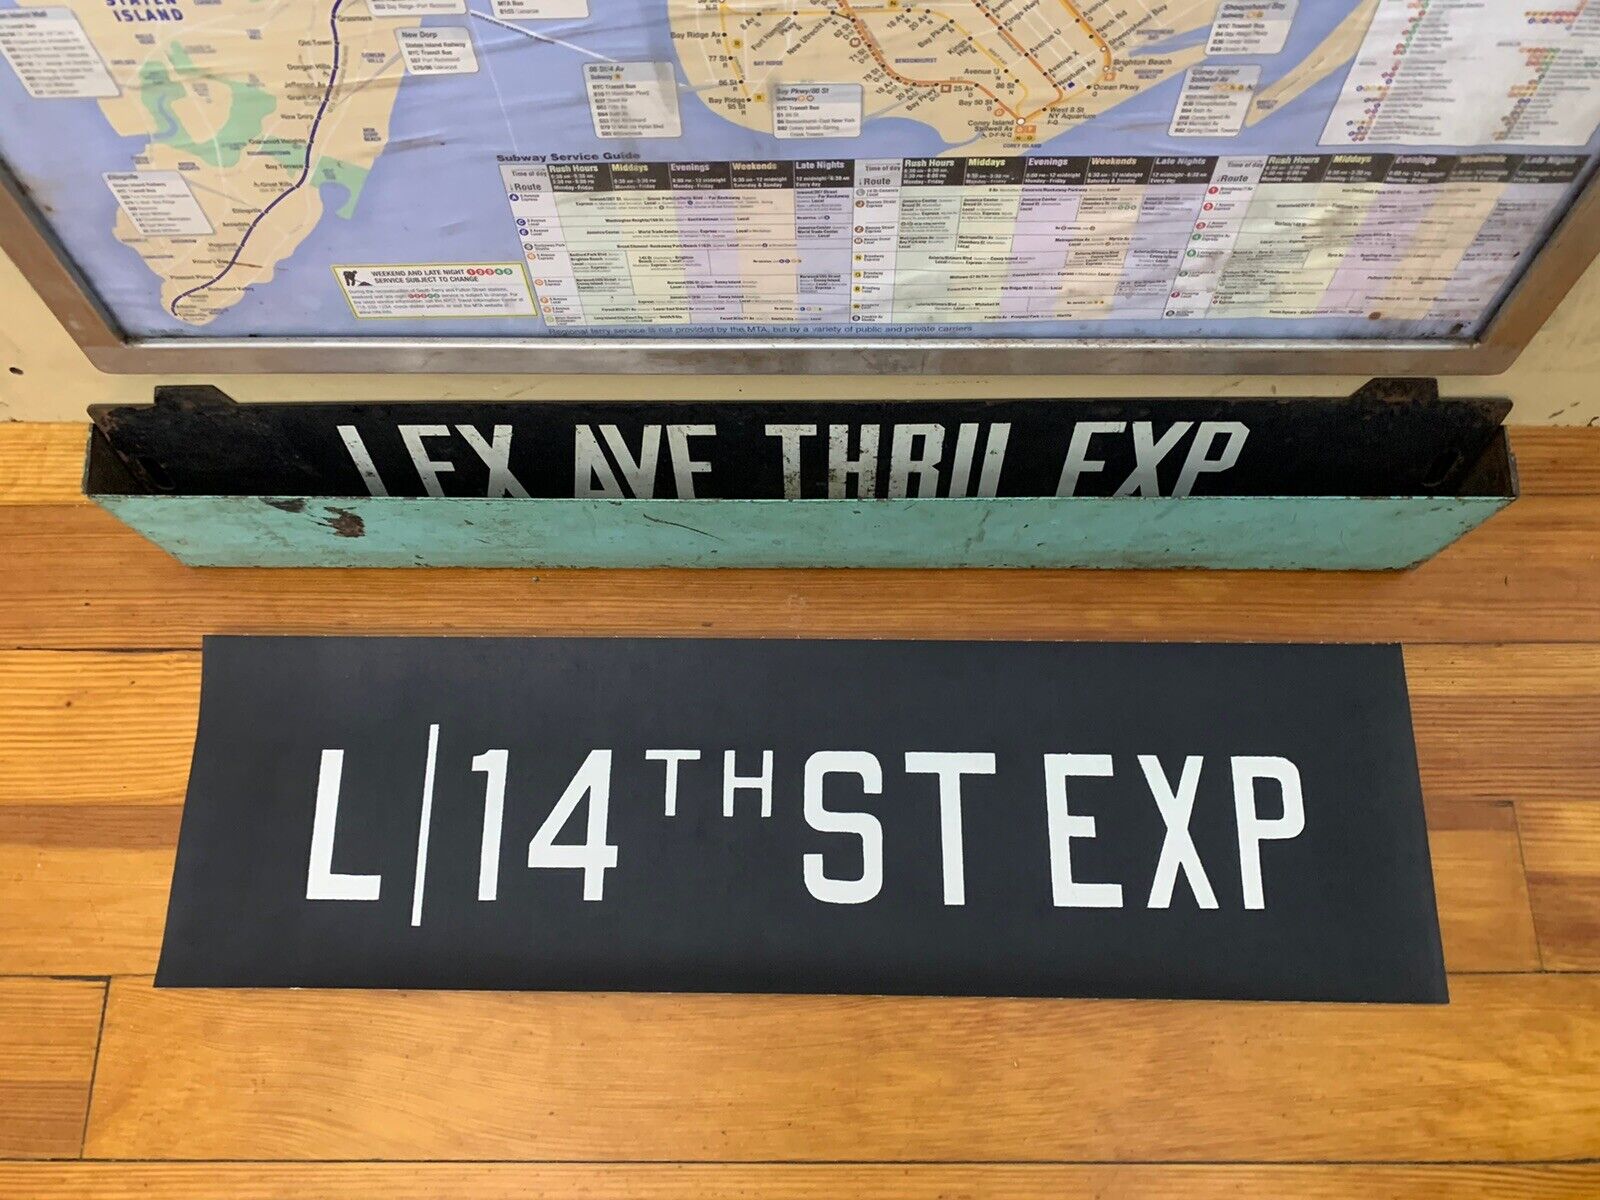 NY NYC SUBWAY ROLL SIGN L 14th ST EXPRESS CHELSEA GREENWICH VILLAGE UNION SQUARE